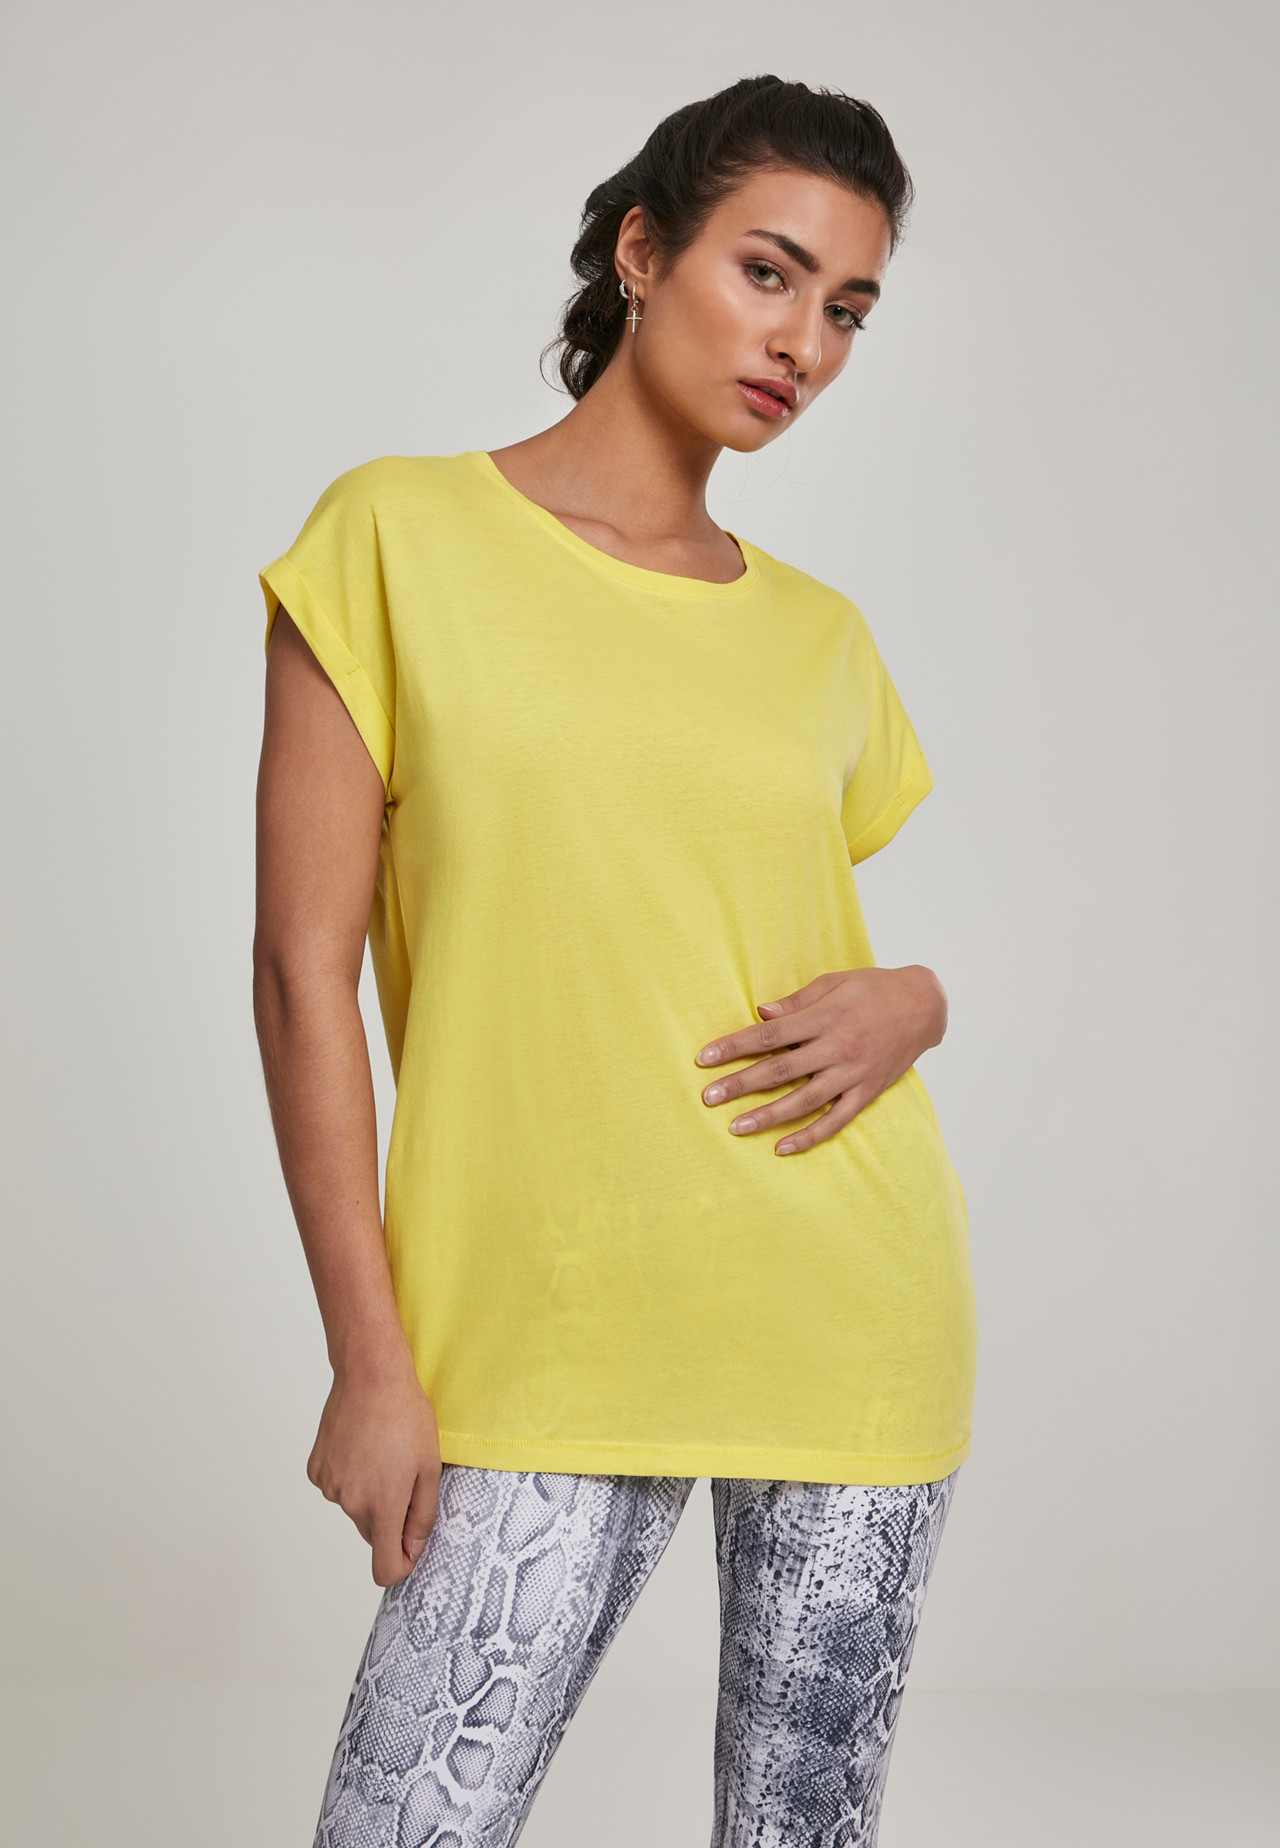 Urban Classics Ladies Extended Shoulder Tee (Bright Yellow, L)